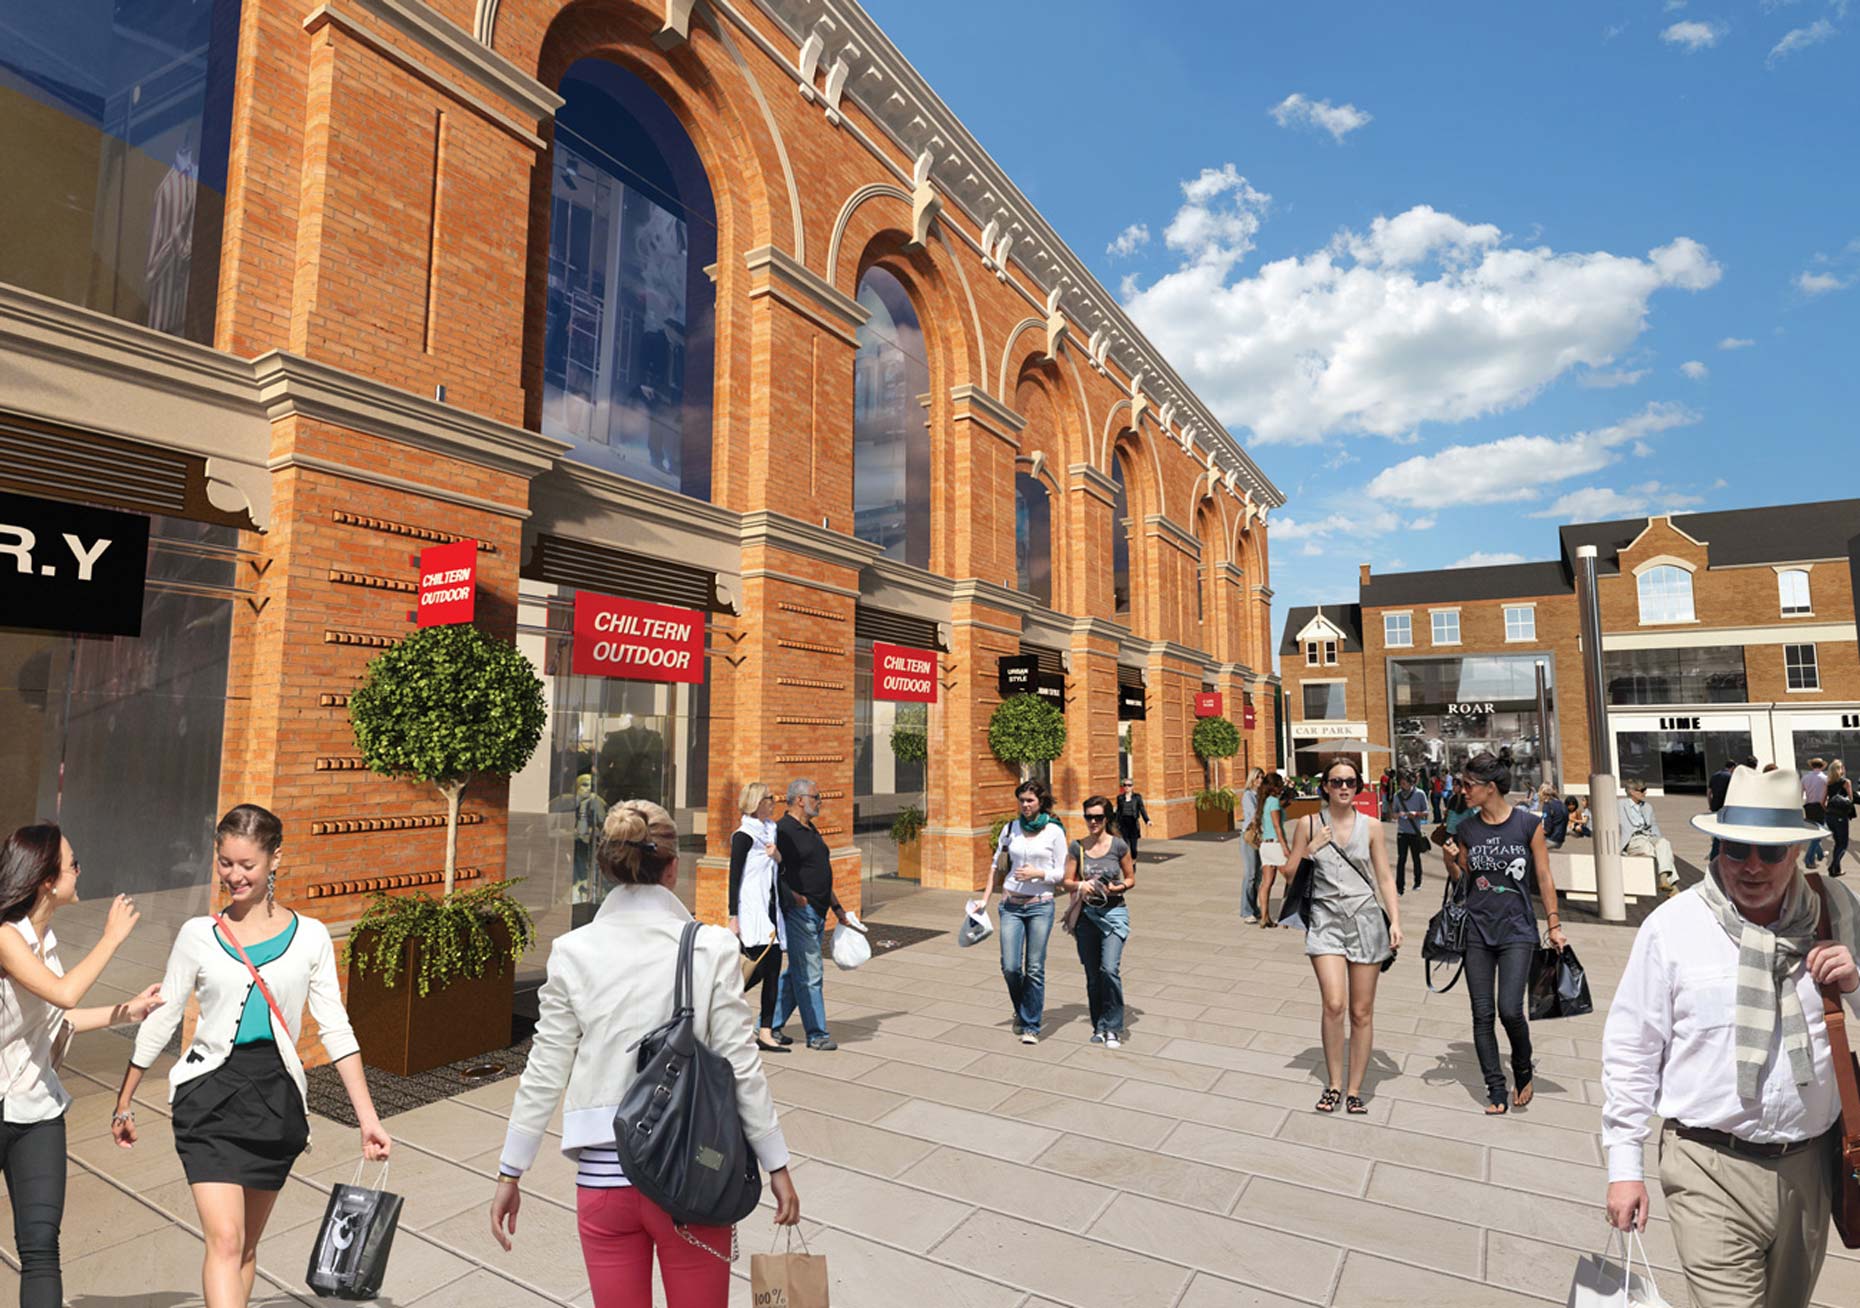 Modern extensions to the Corn Exchange will be demolished, allowing views of the new facades from the High Street.